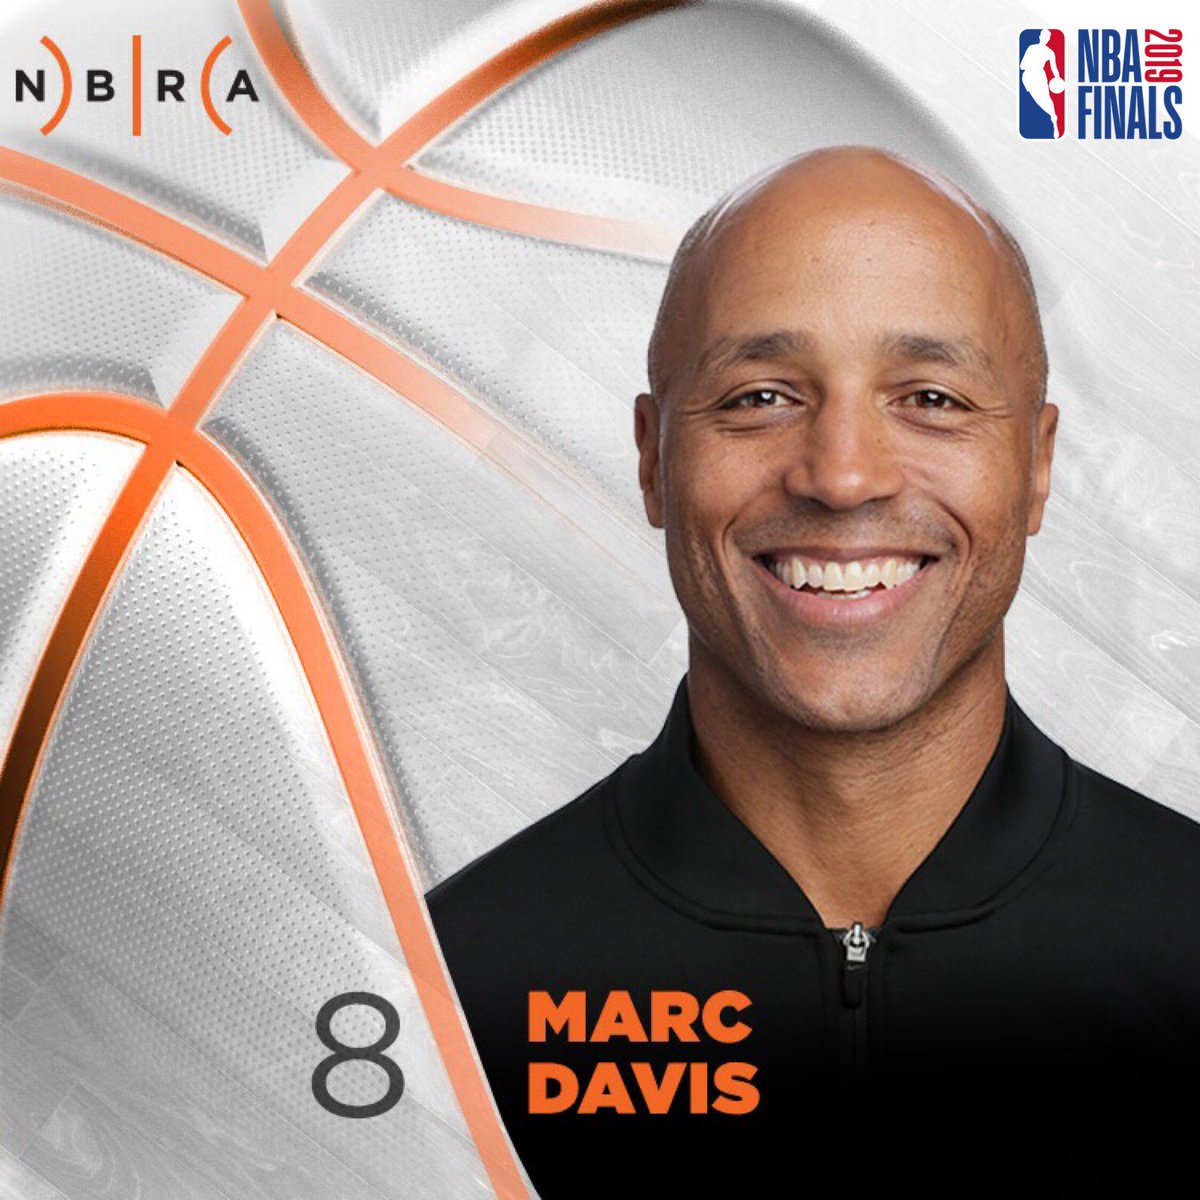 NBA Referees on X: "Marc Davis is tonight's crew chief. Davis is in his  21st NBA season, having officiated in 14 #NBAPlayoffs and 10 previous  #NBAFinals games. Davis attended the U.S. @NavalAcademy,